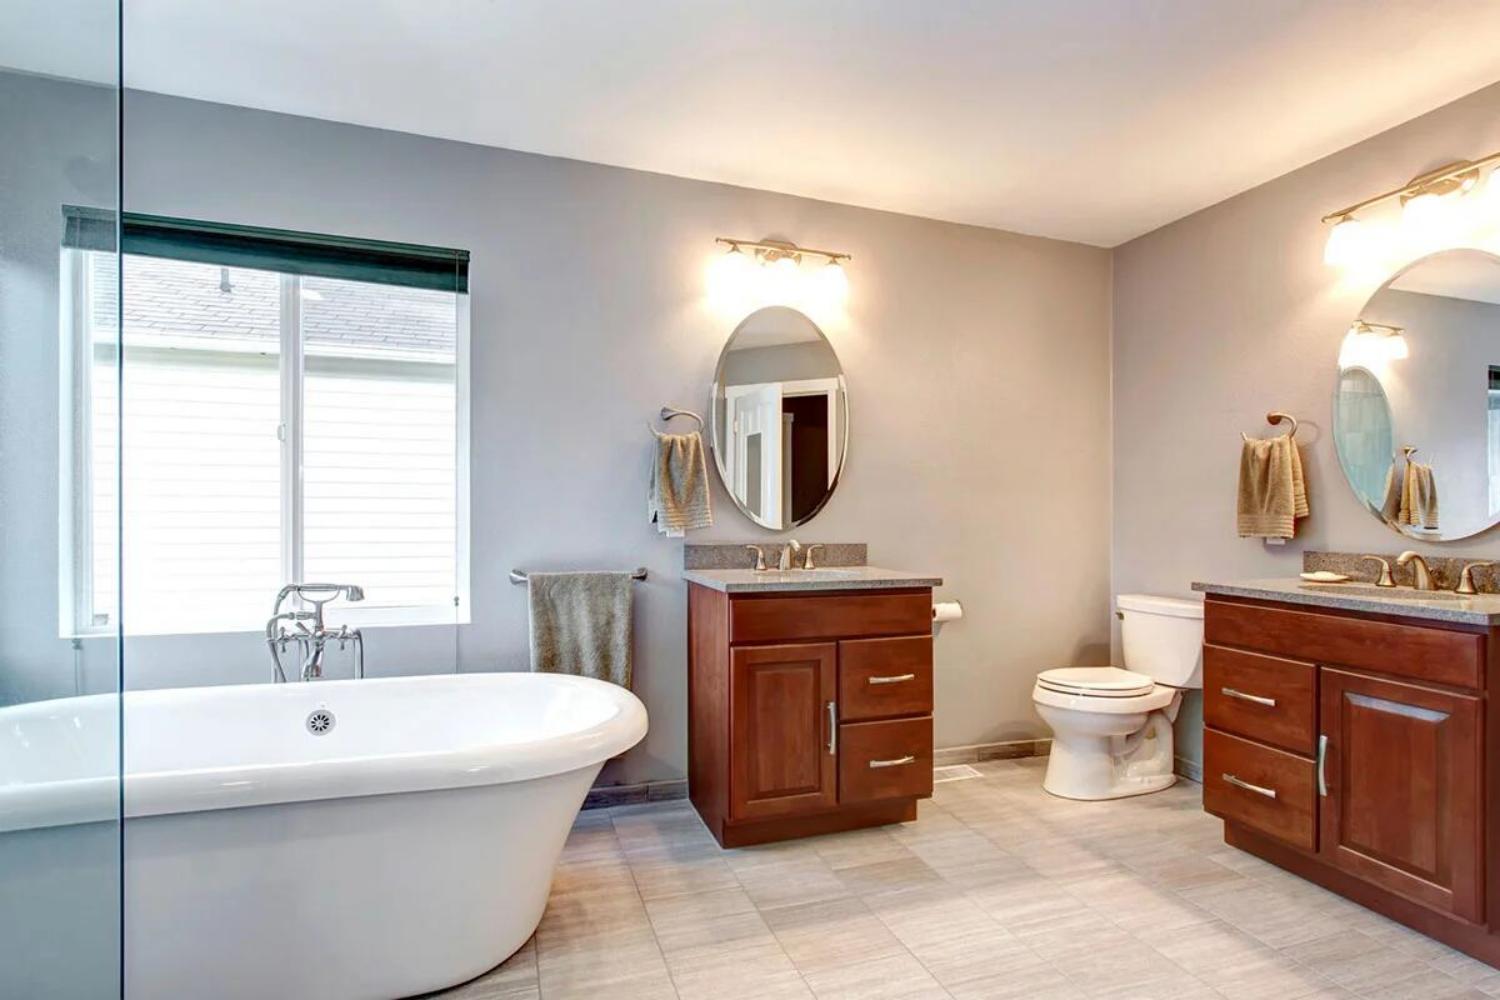 How to Budget for A Bathroom Remodel? - Blog - 3